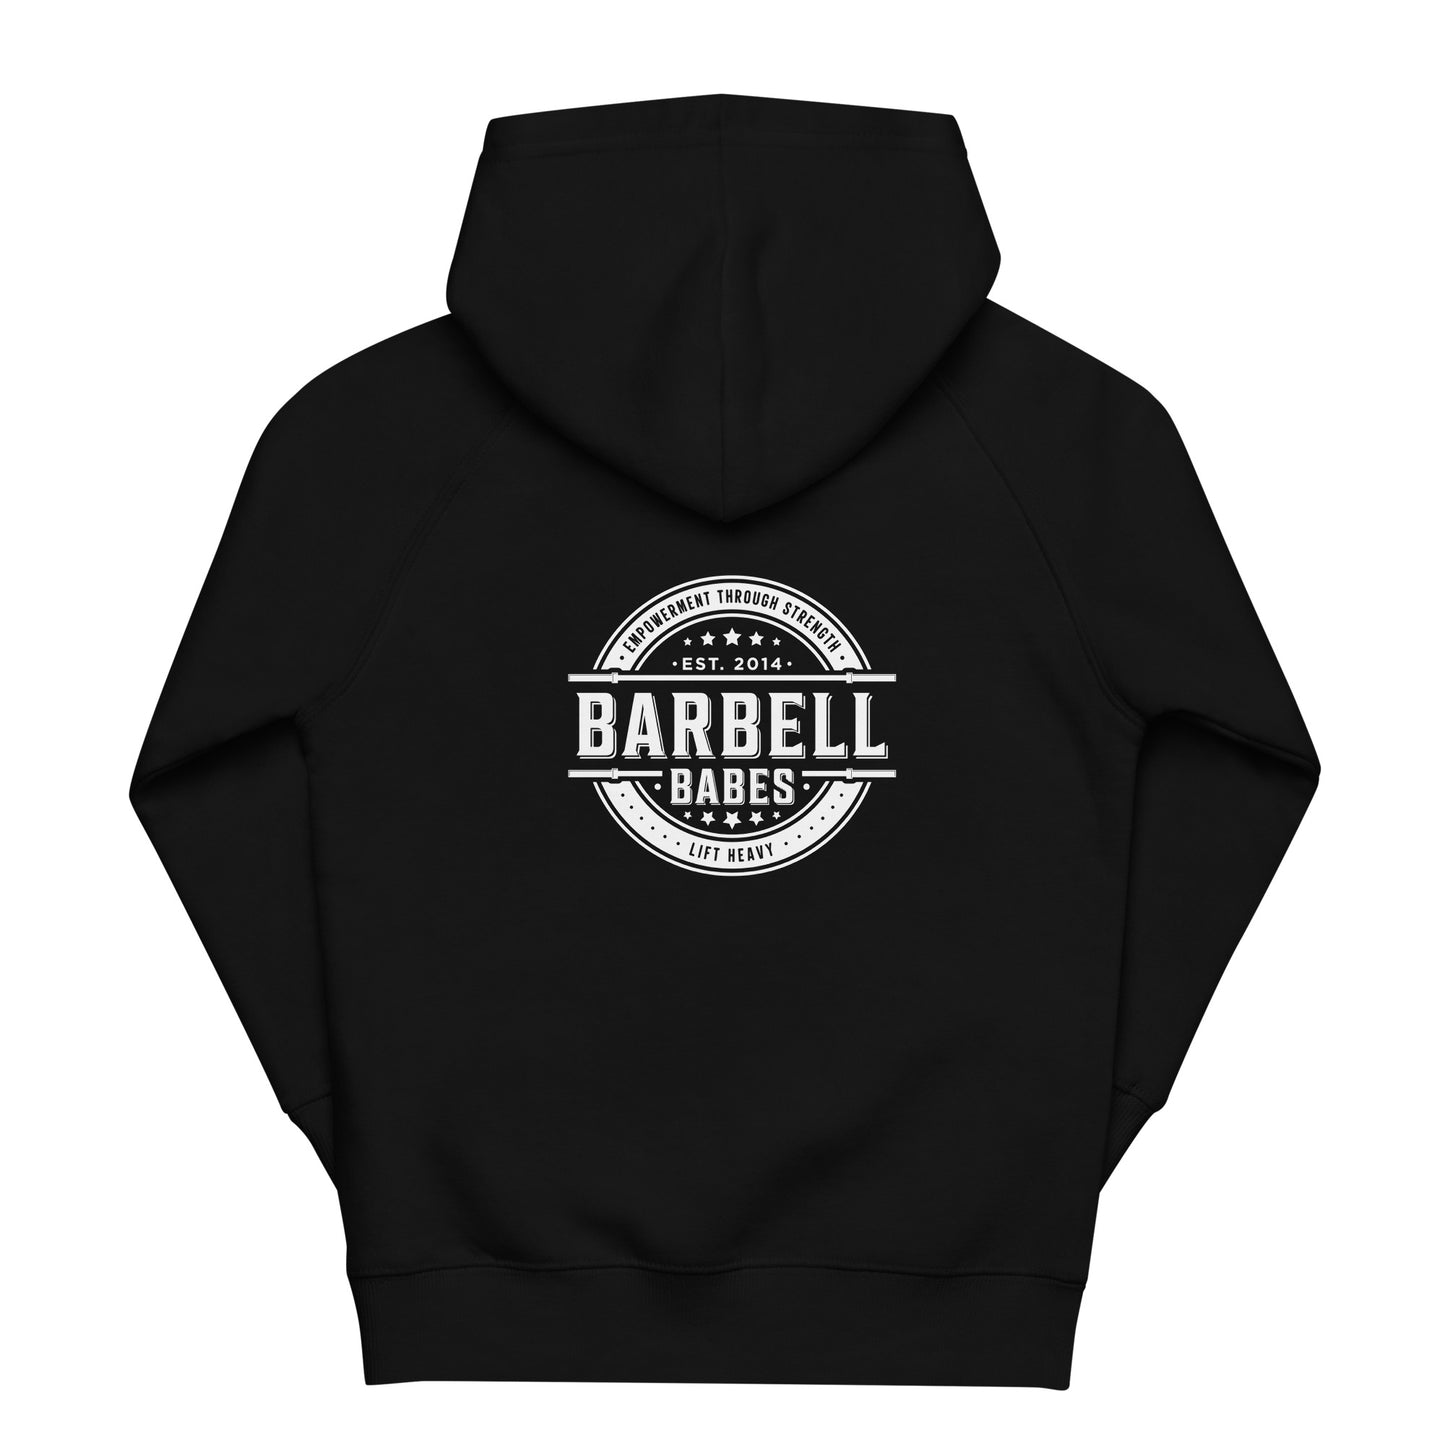 Kids: B is for Barbell Babes